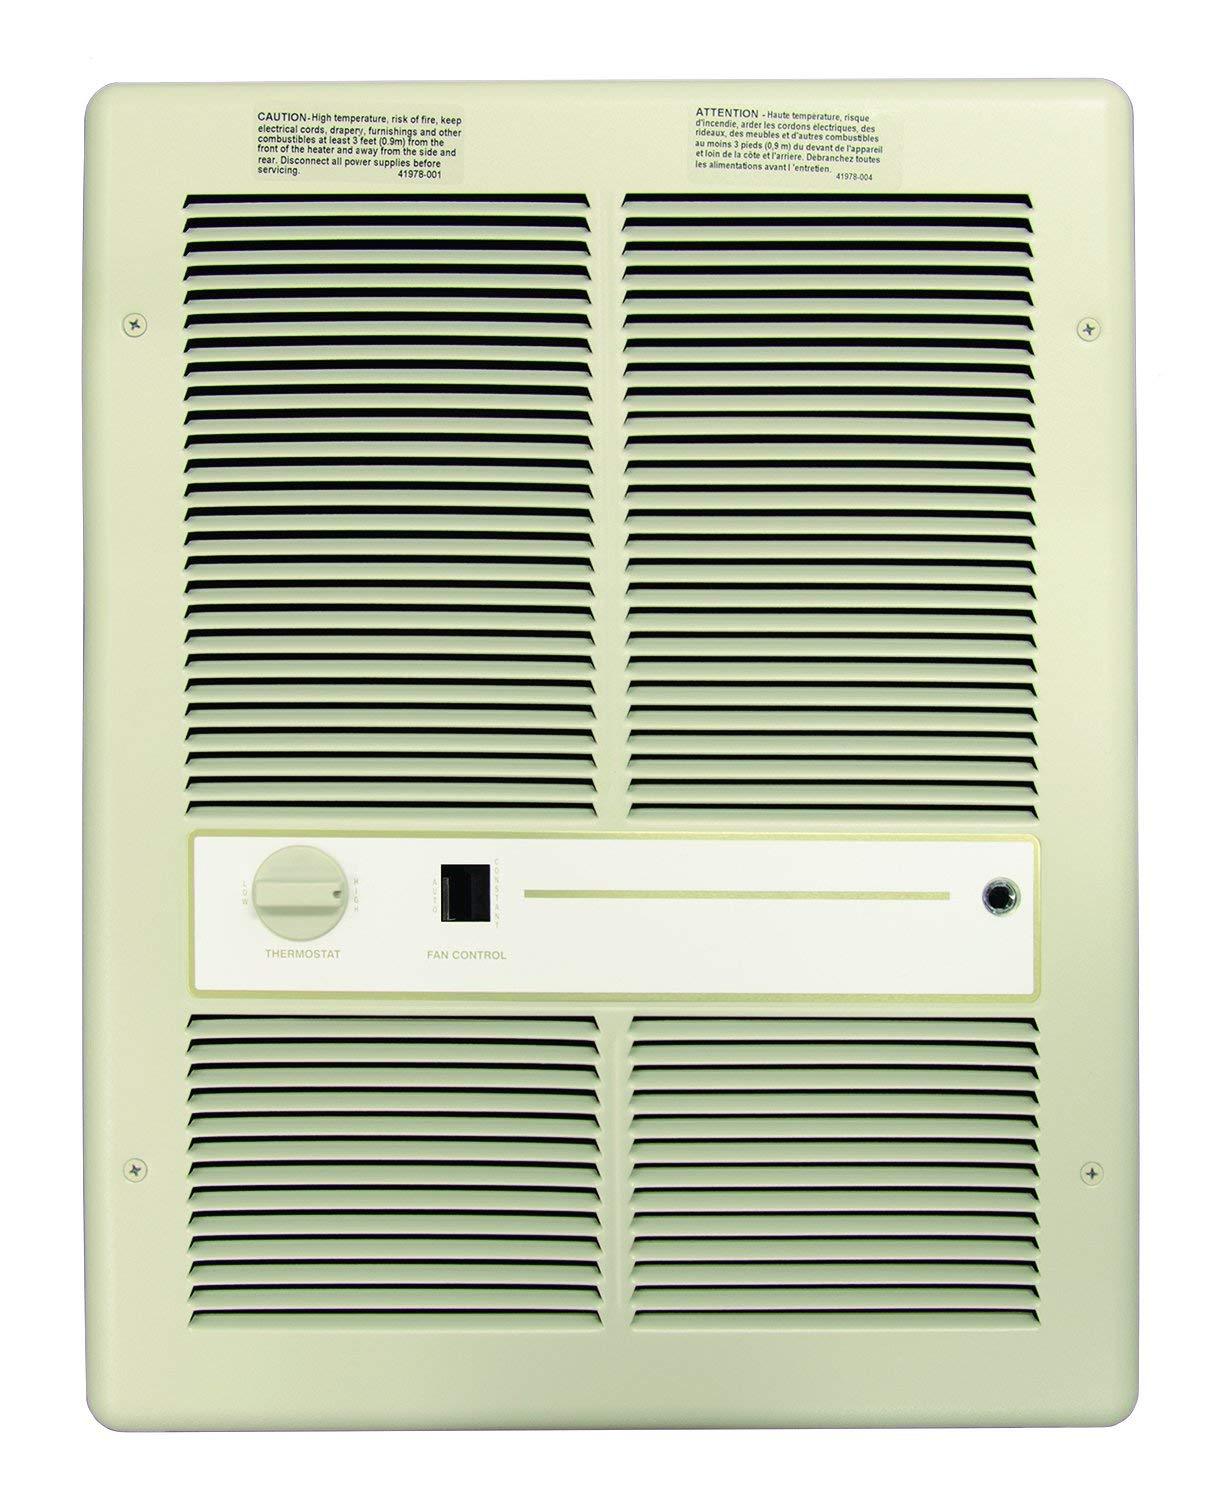 TPI 3000/2250W 240/208V 3310 Series Fan Forced Wall Heater (Ivory) - With Summer Fan Switch - 1 Pole Thermostat - HF3315TSRP